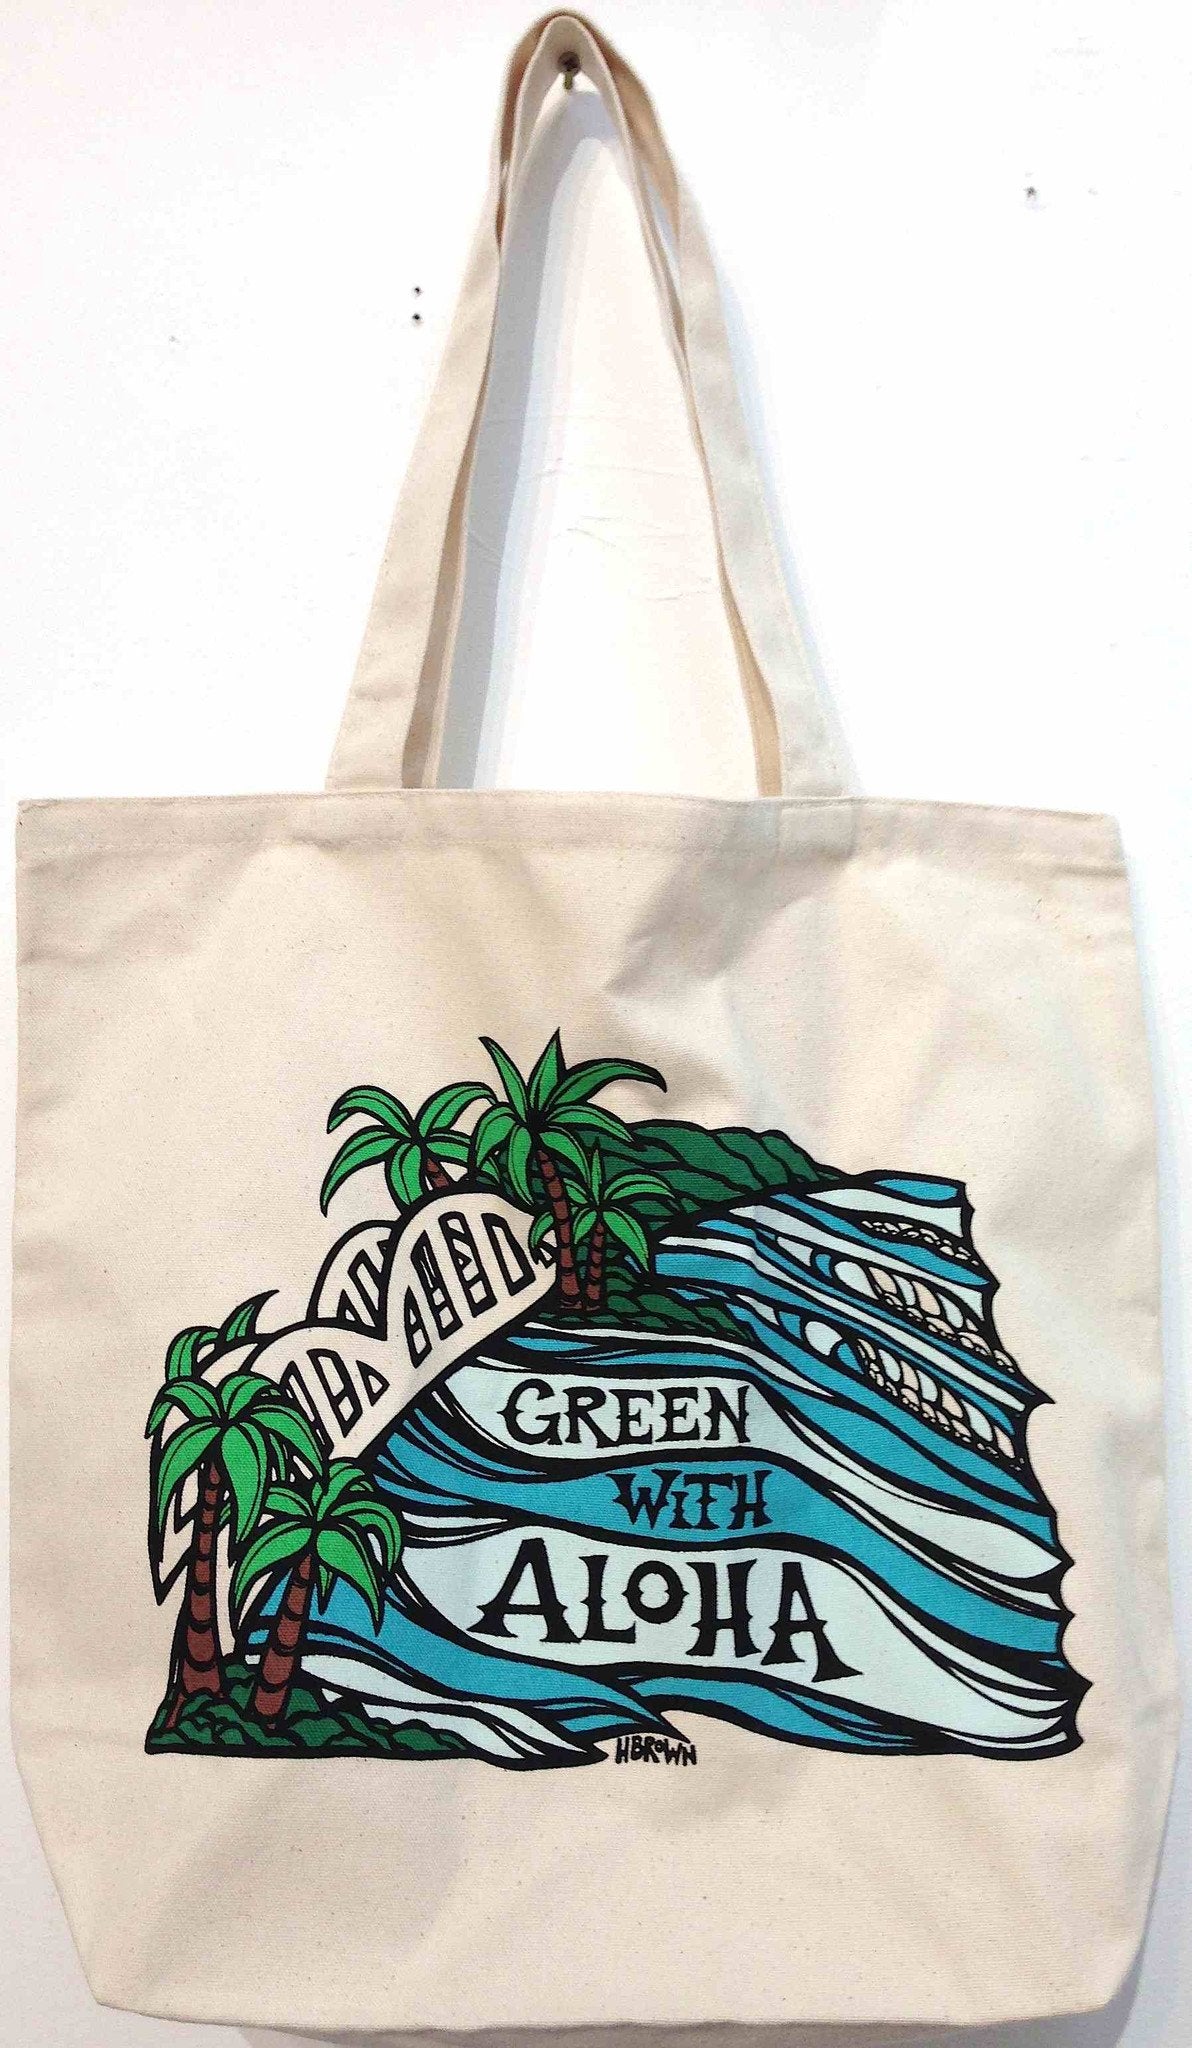 Halara Graphic Solid White Green Tote One Size - 61% off